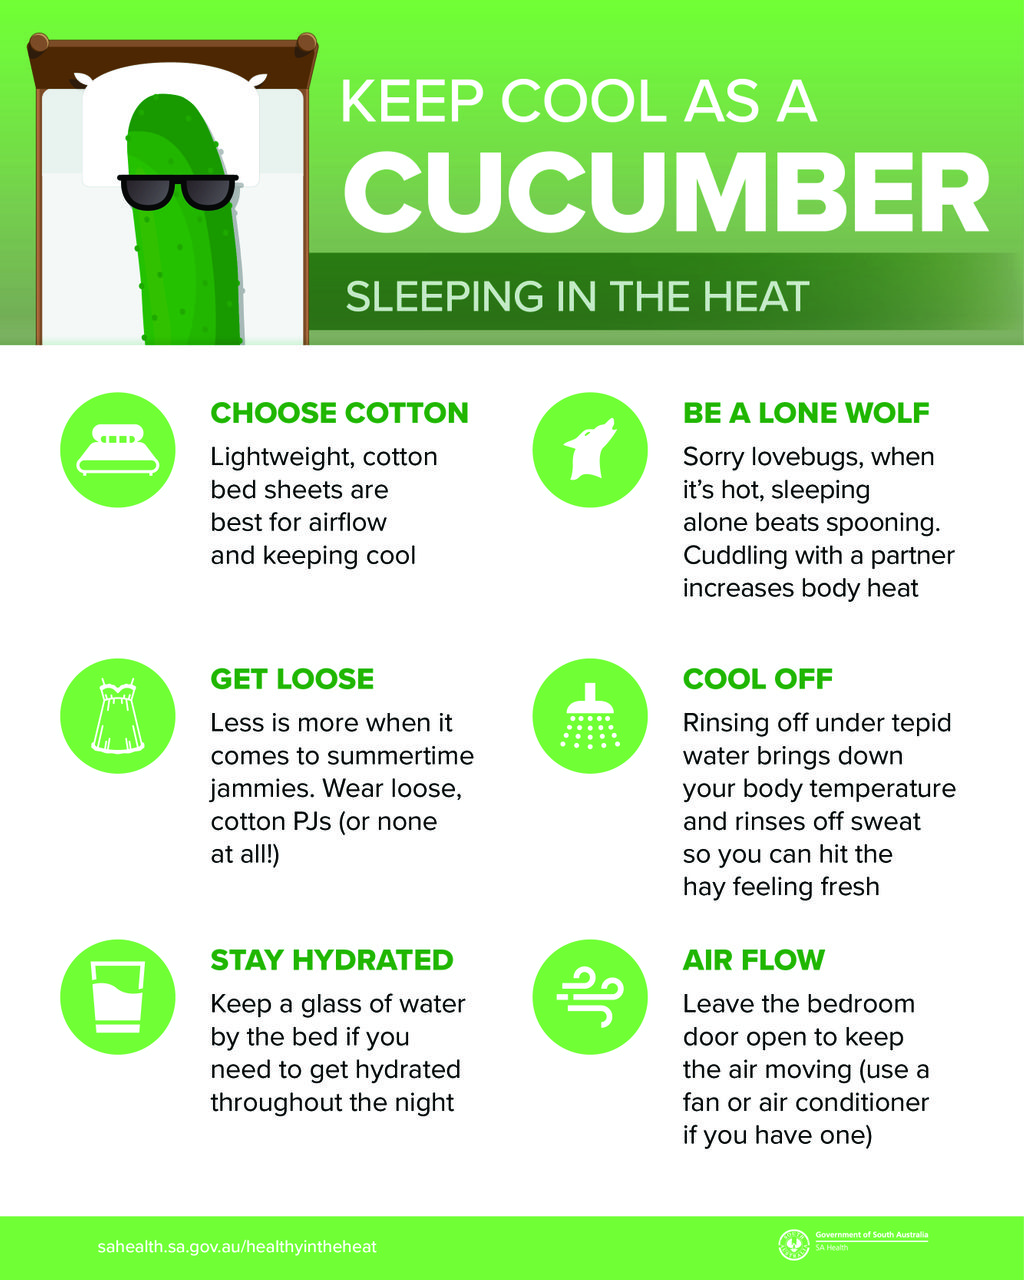 SA Health on X: Tips for keeping cool as a cucumber and sleeping